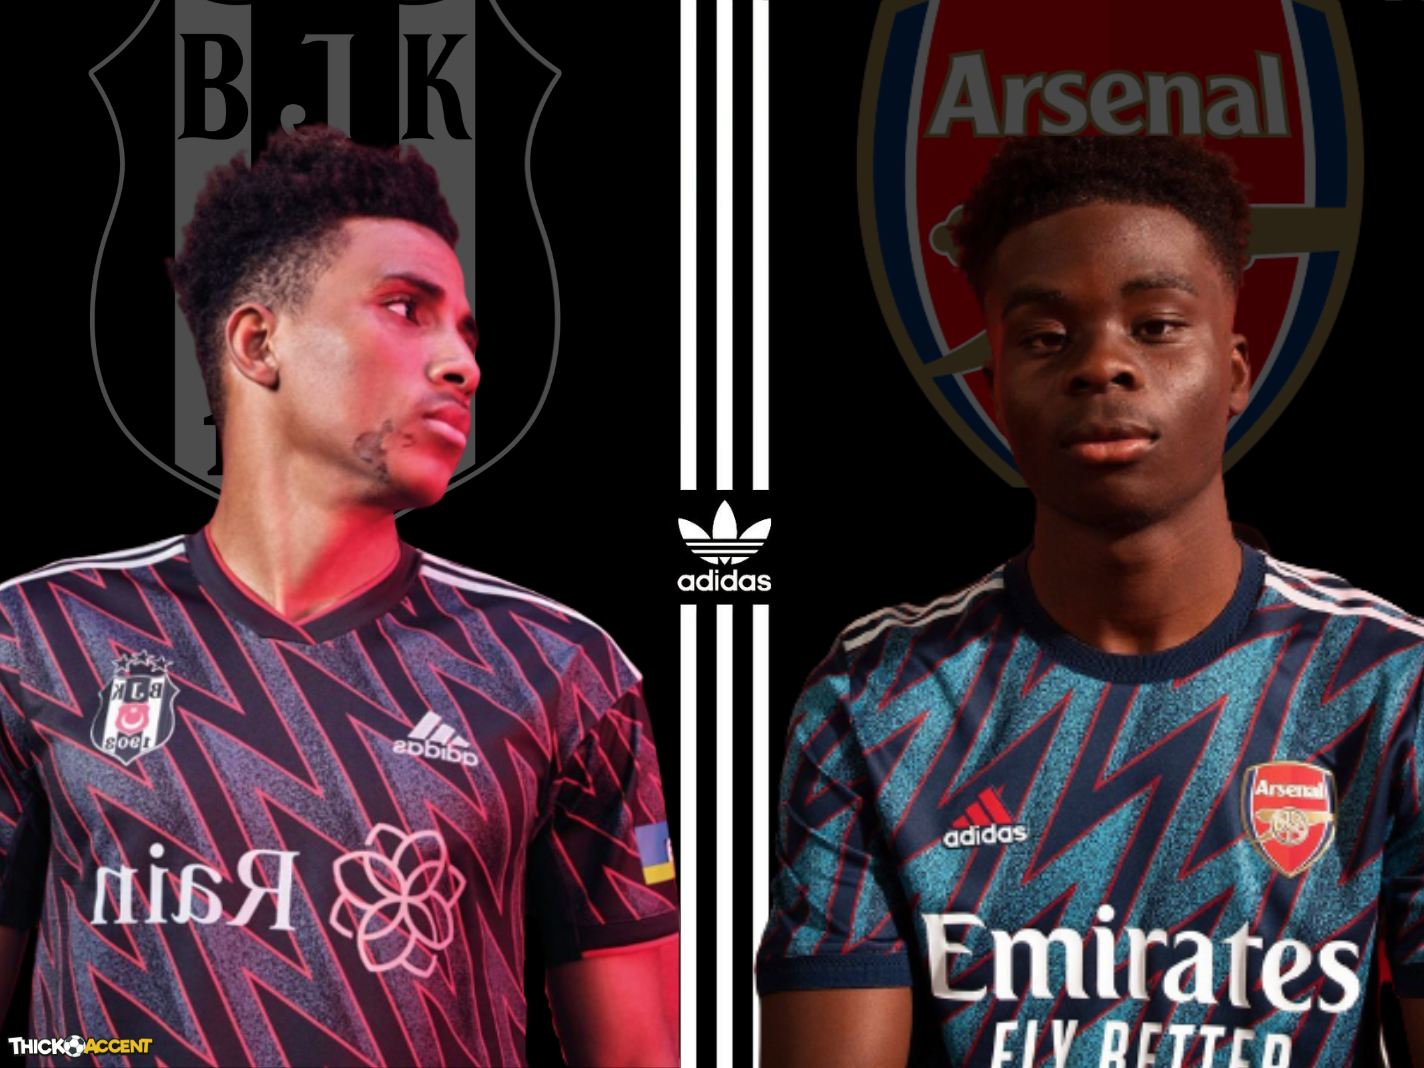 Adidas face backlash from Besiktas and Arsenal fans for new kit